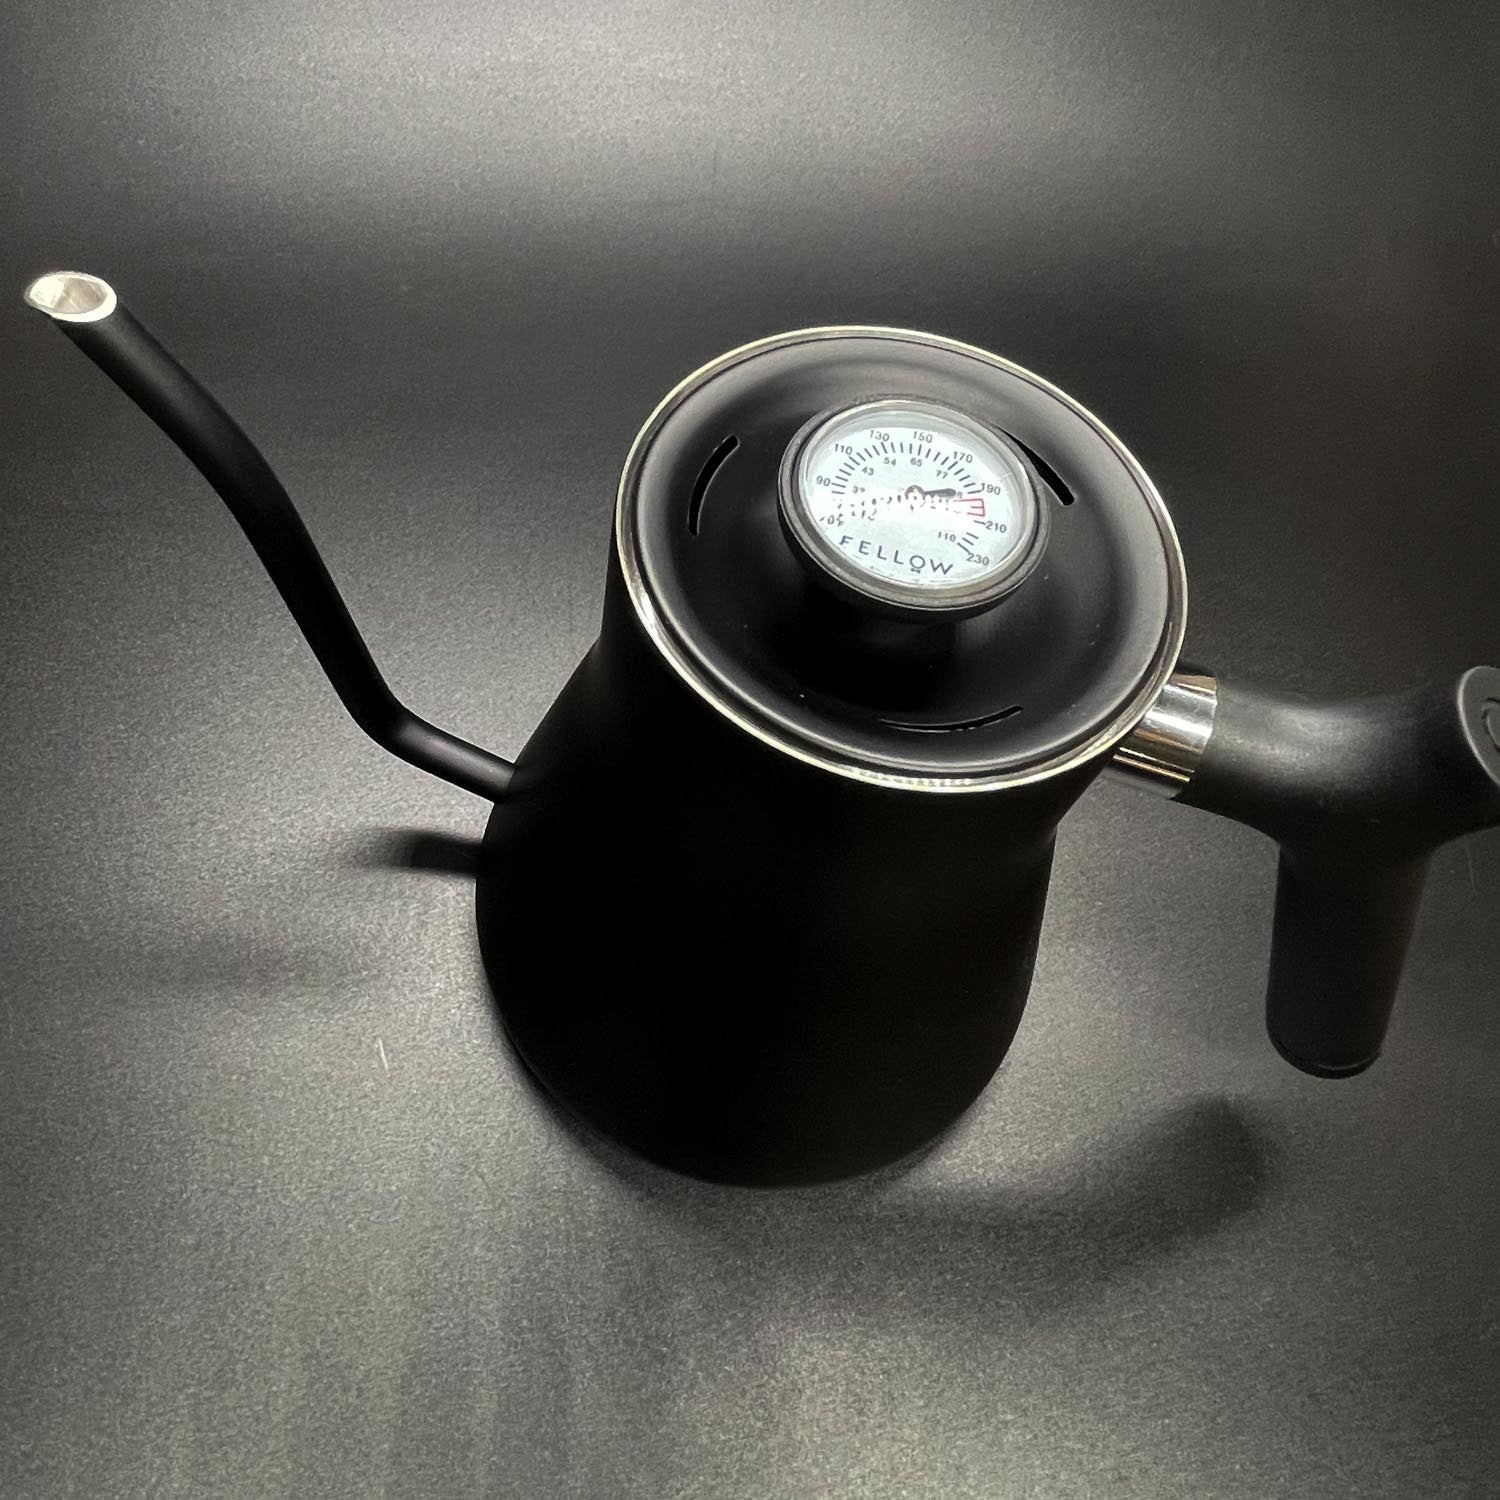 Fellow Stagg Stovetop Pour-Over Coffee and Tea Kettle - Gooseneck Teapot  with Precision Pour Spout, Built-In Thermometer, Matte Black, 1 Liter